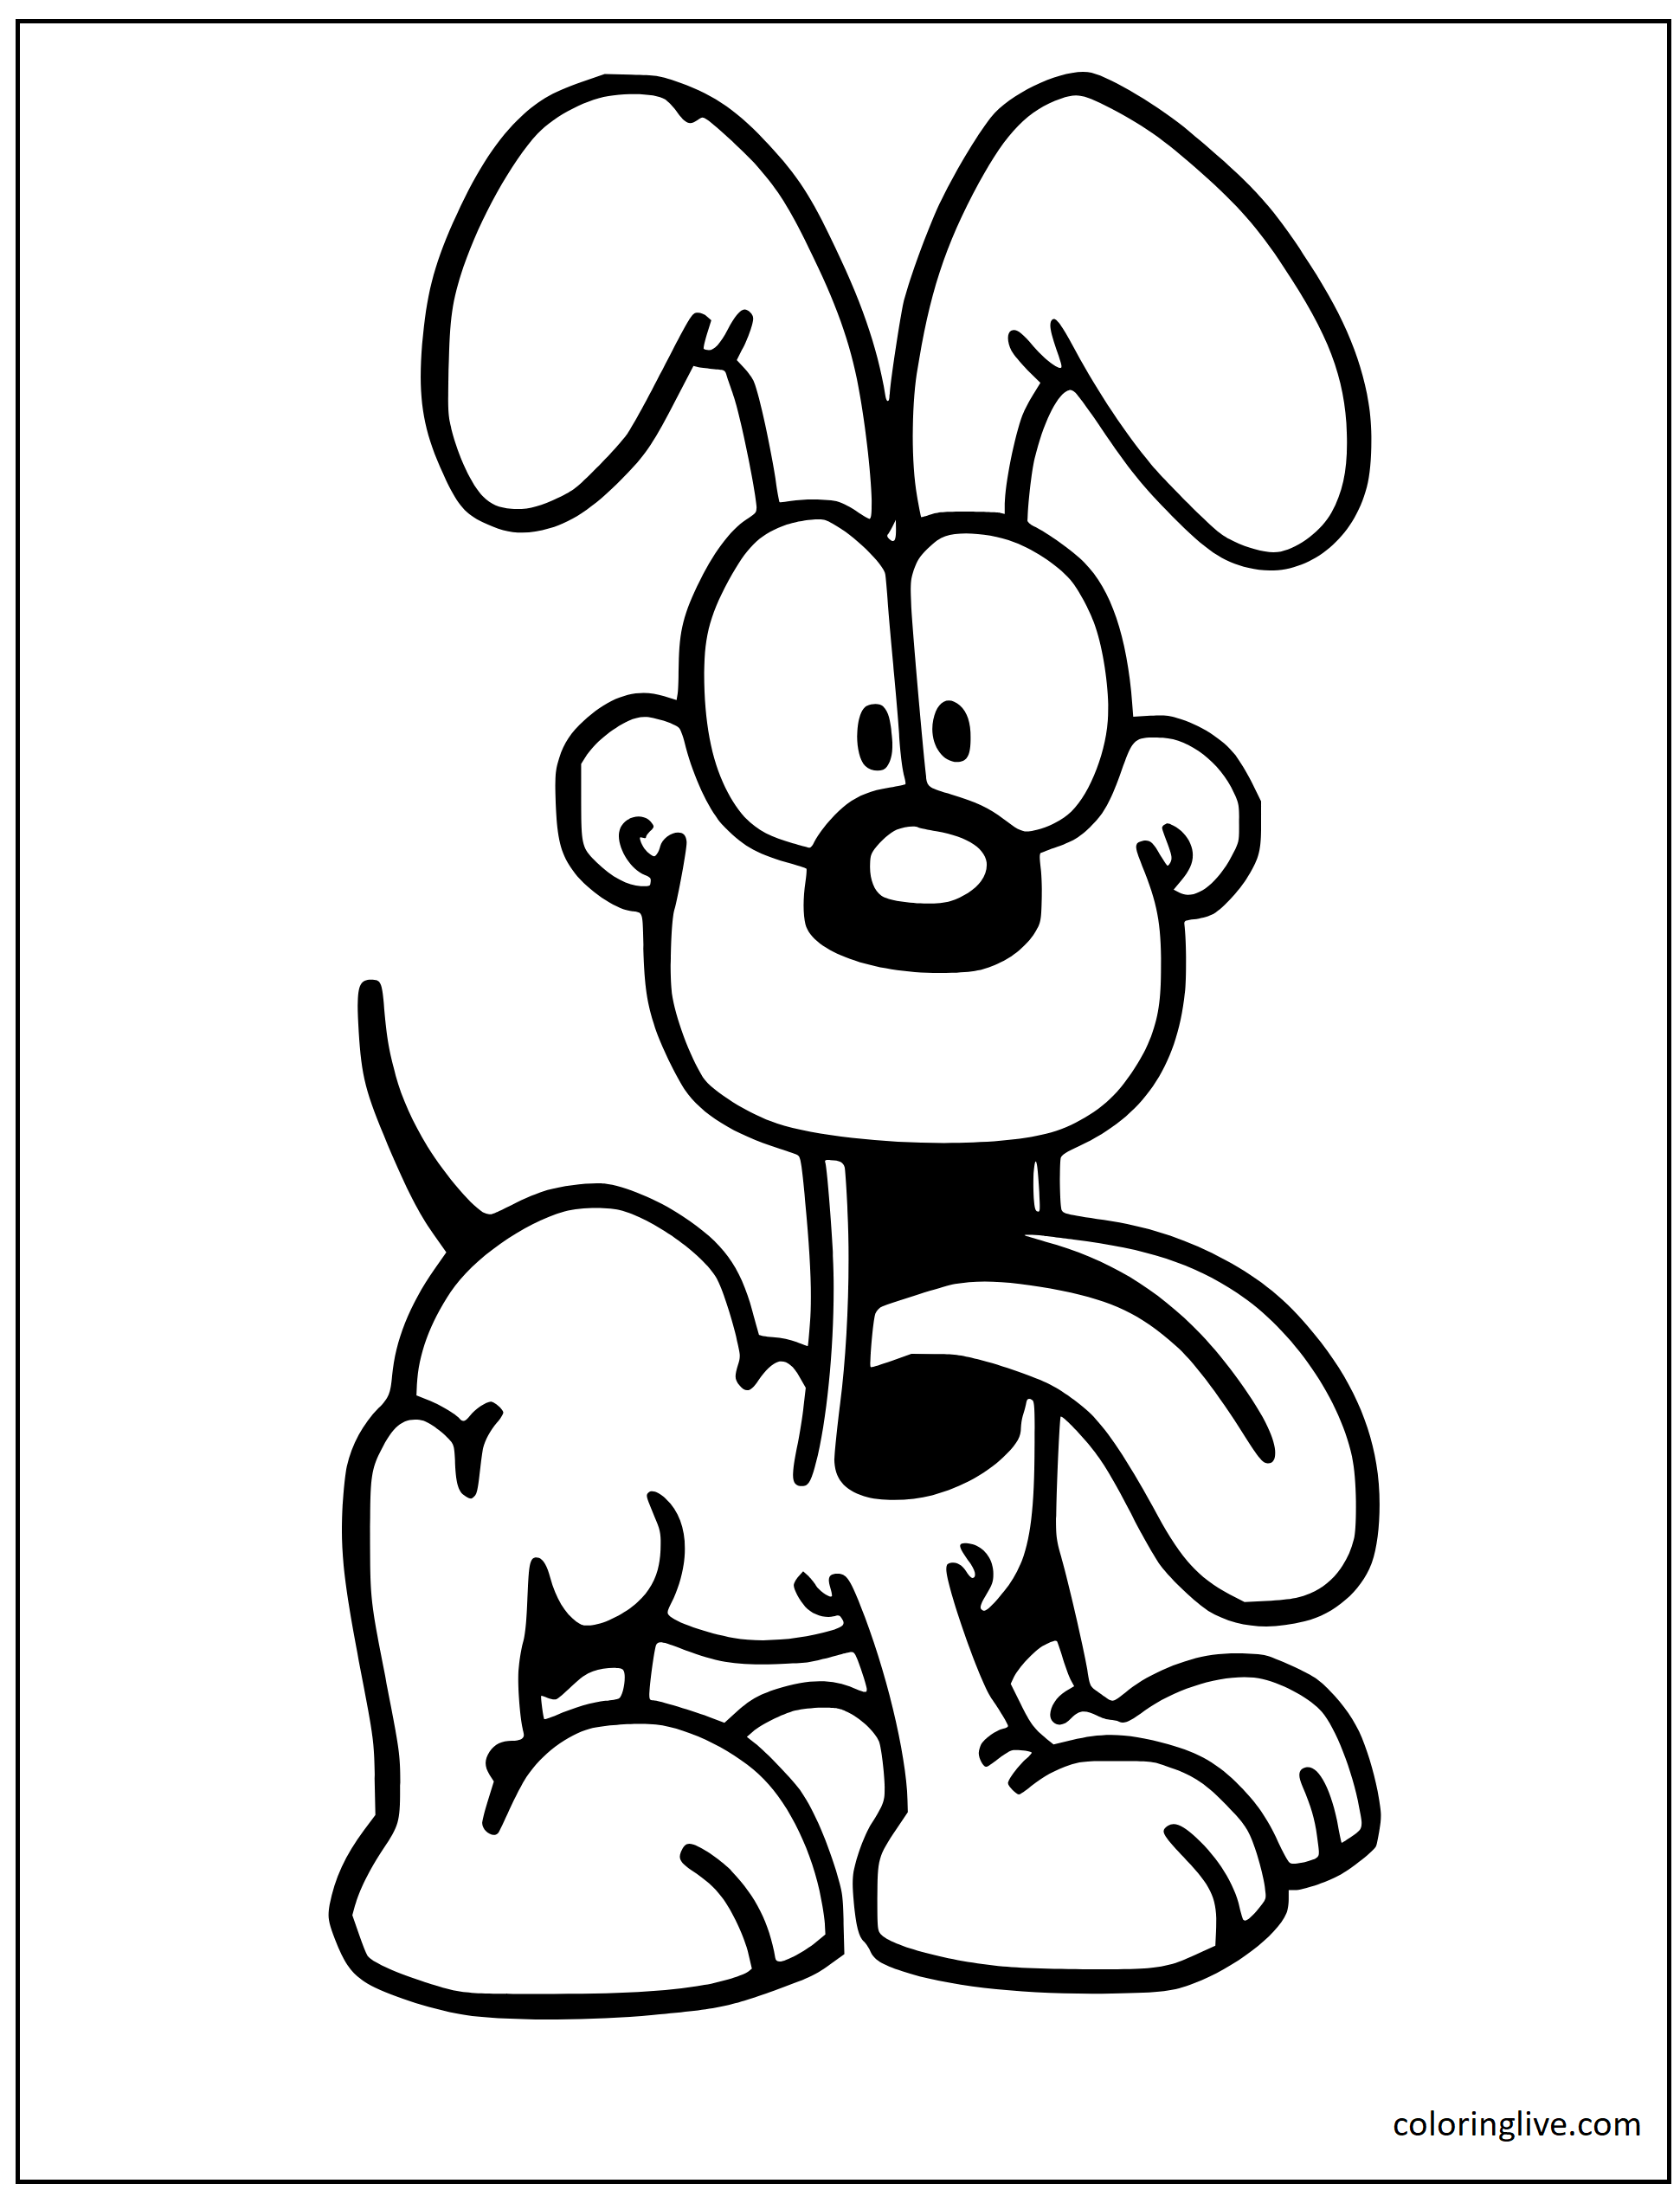 Printable Odie  sheet Garfield Coloring Page for kids.